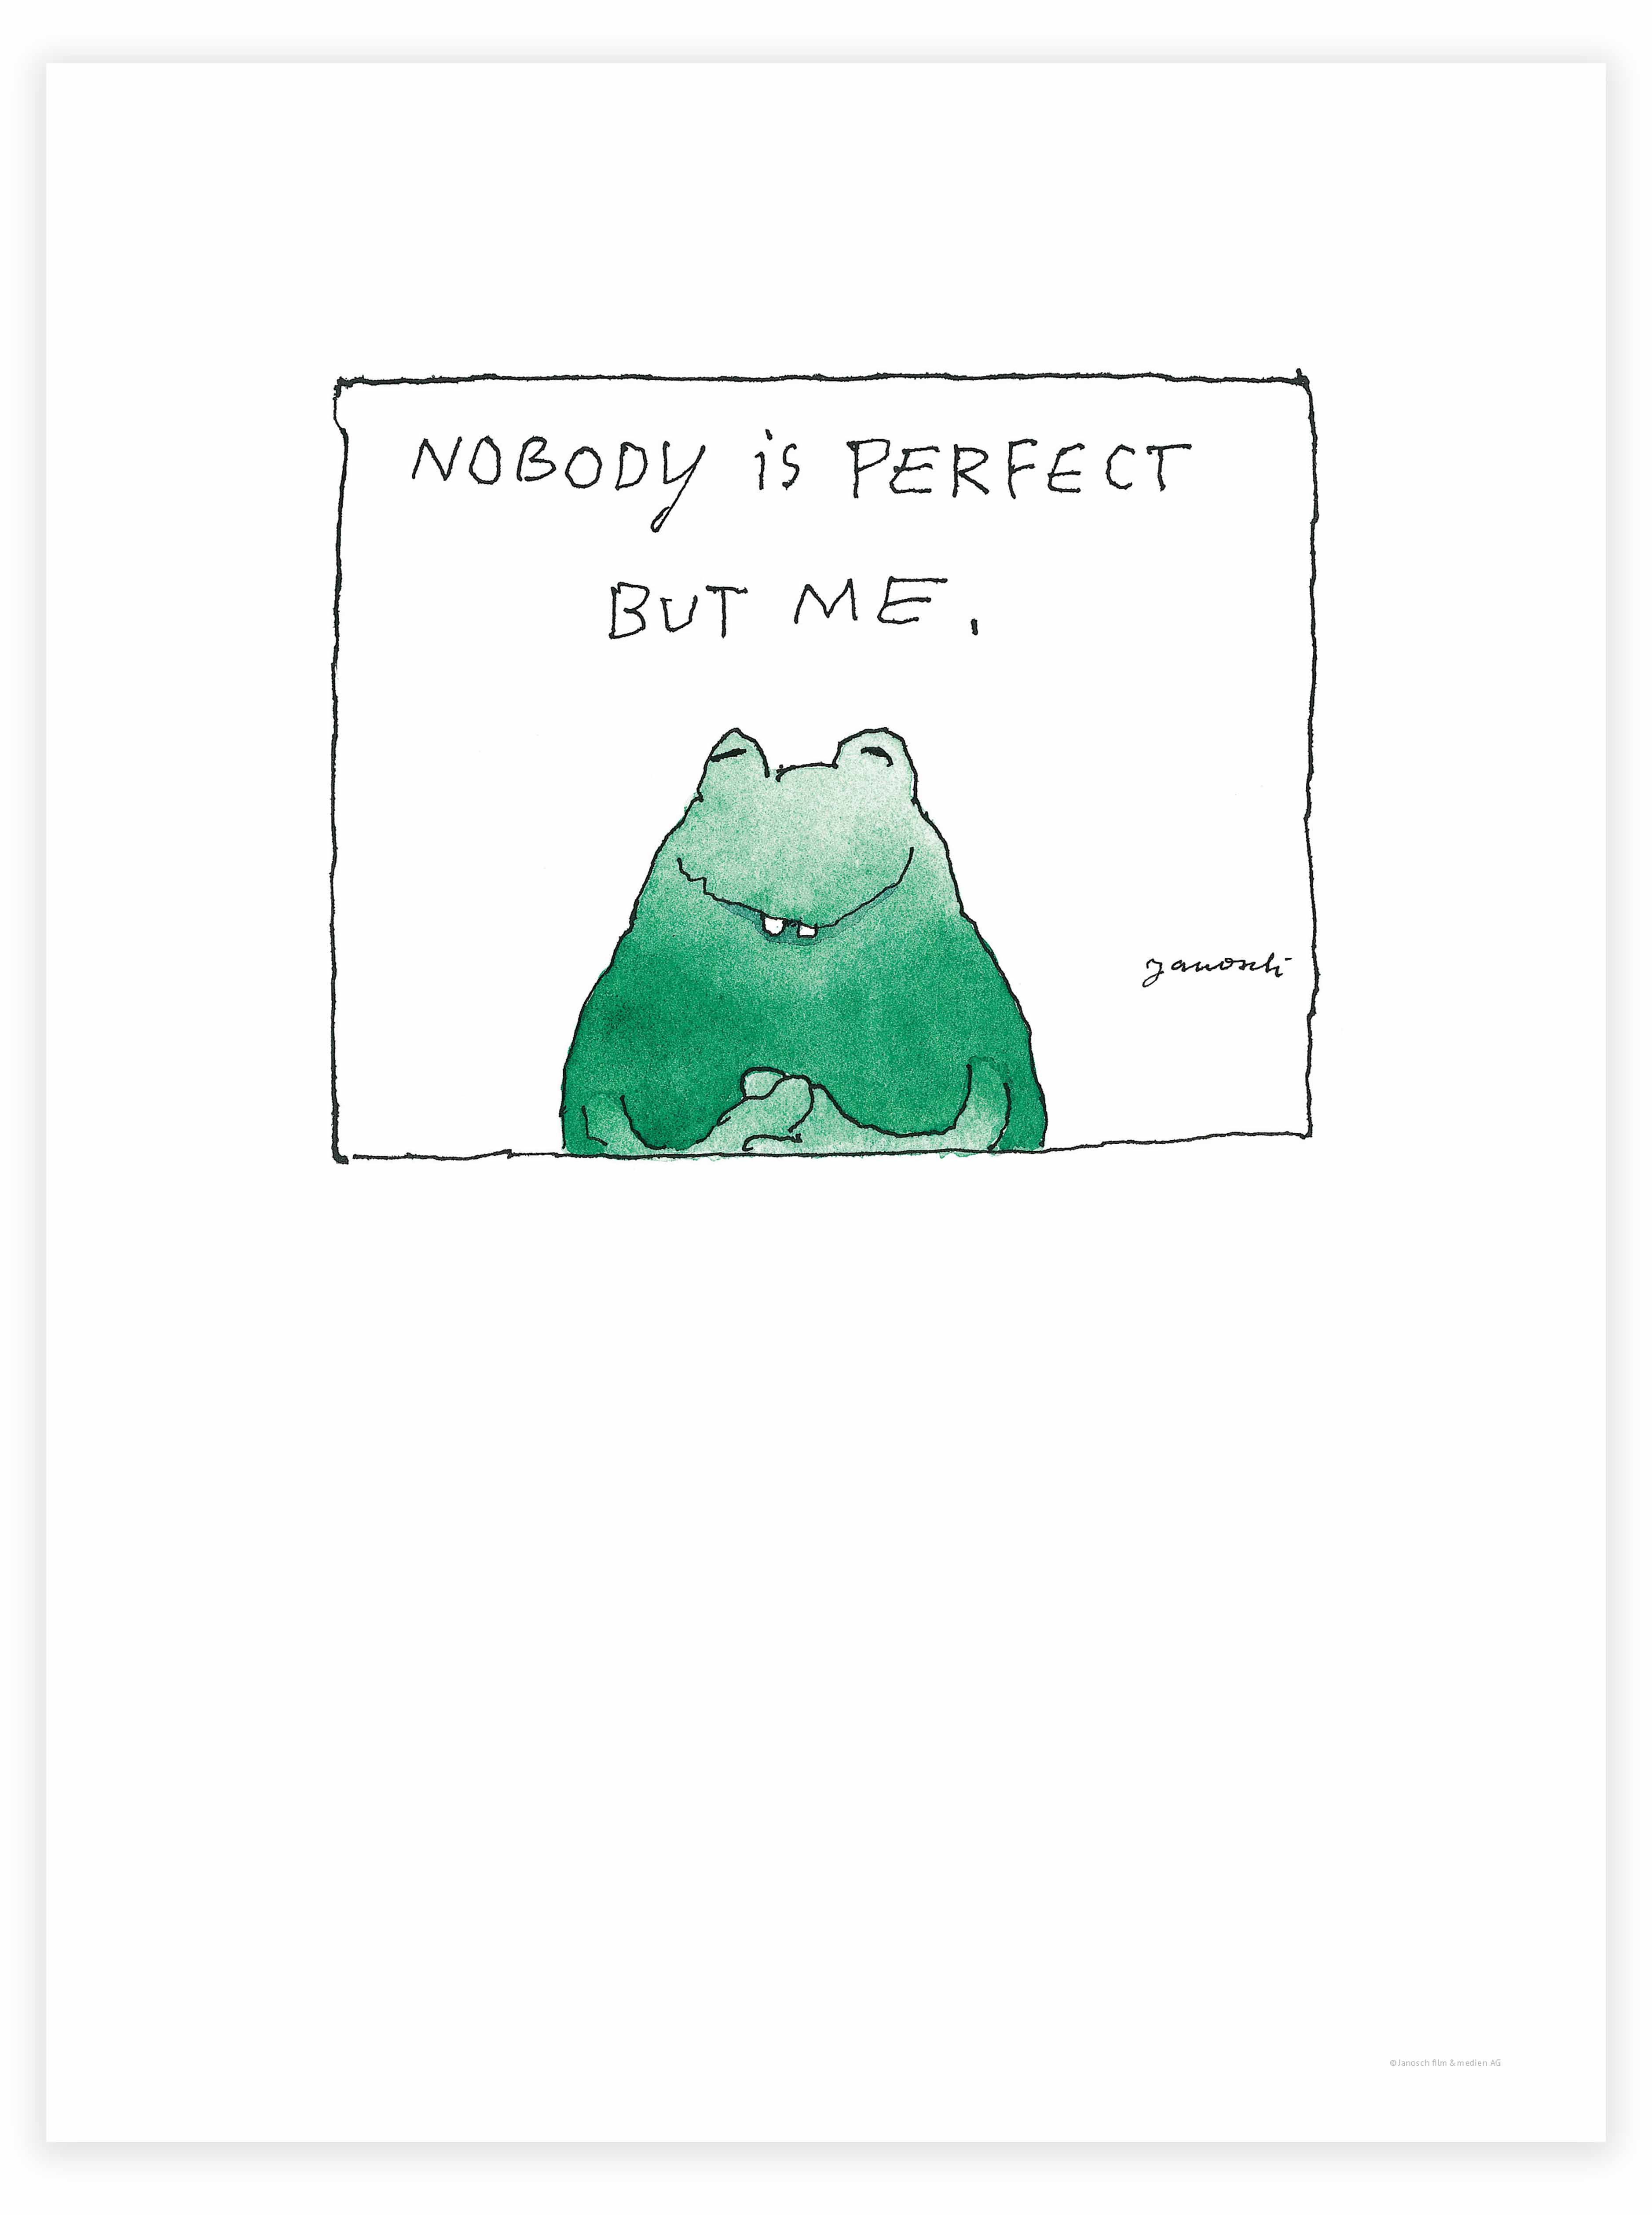 Nobody is perfect, but me